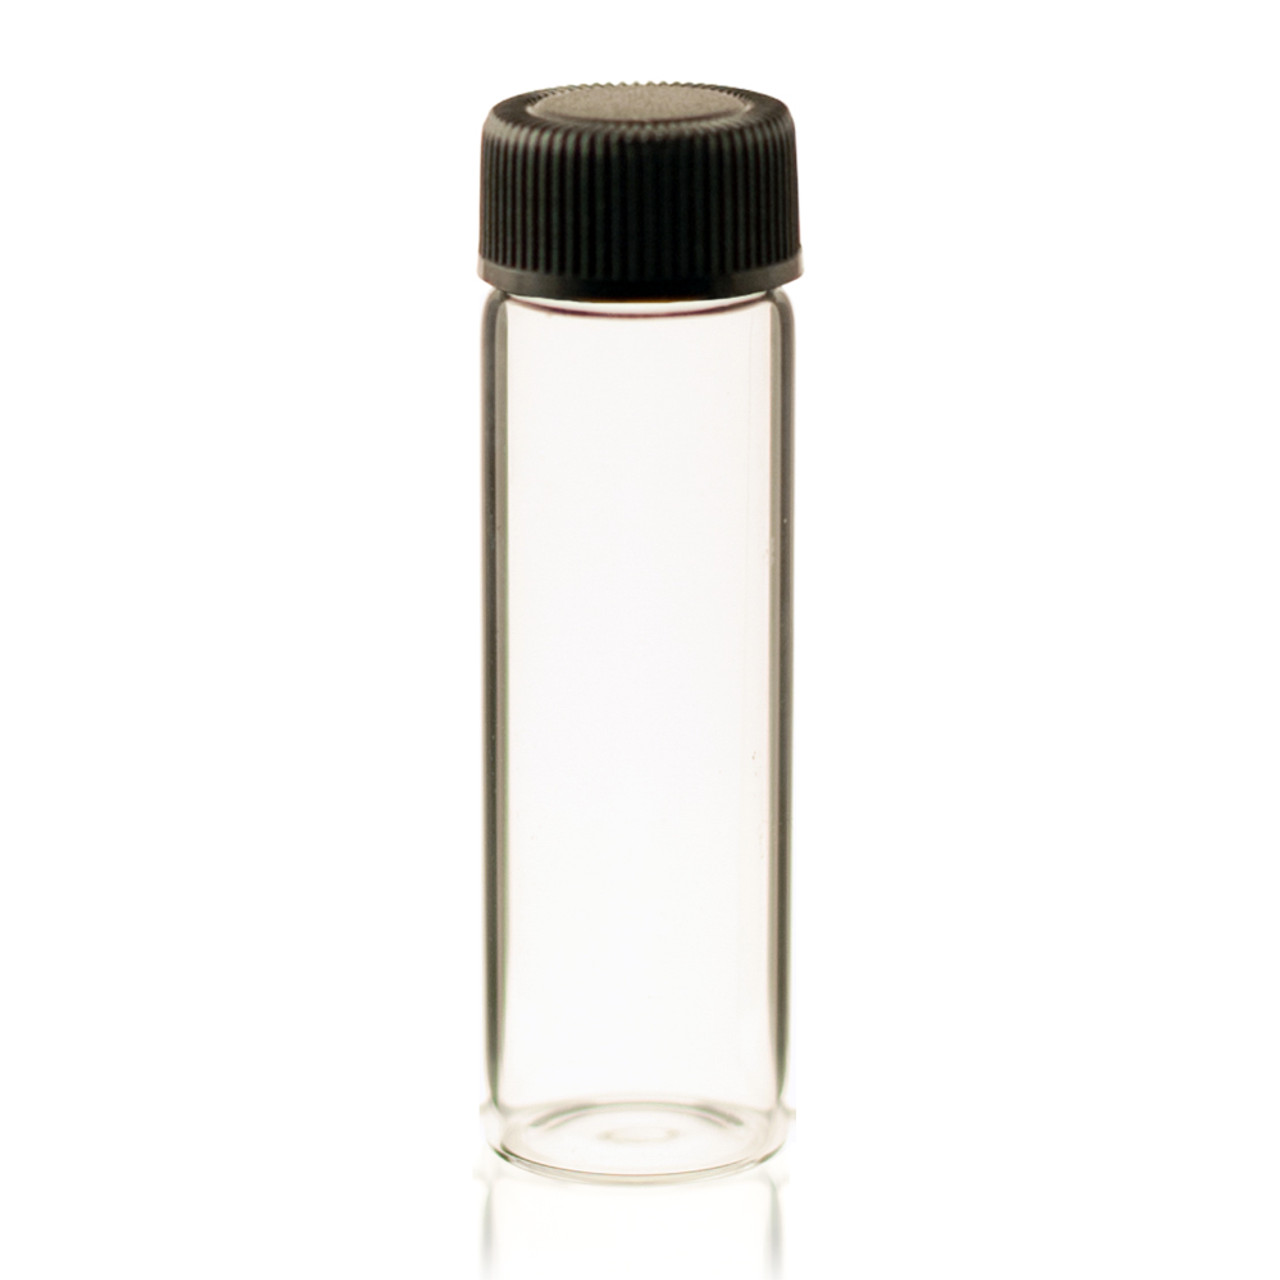 Download 2 Dram Clear Glass Vial - w/Cap